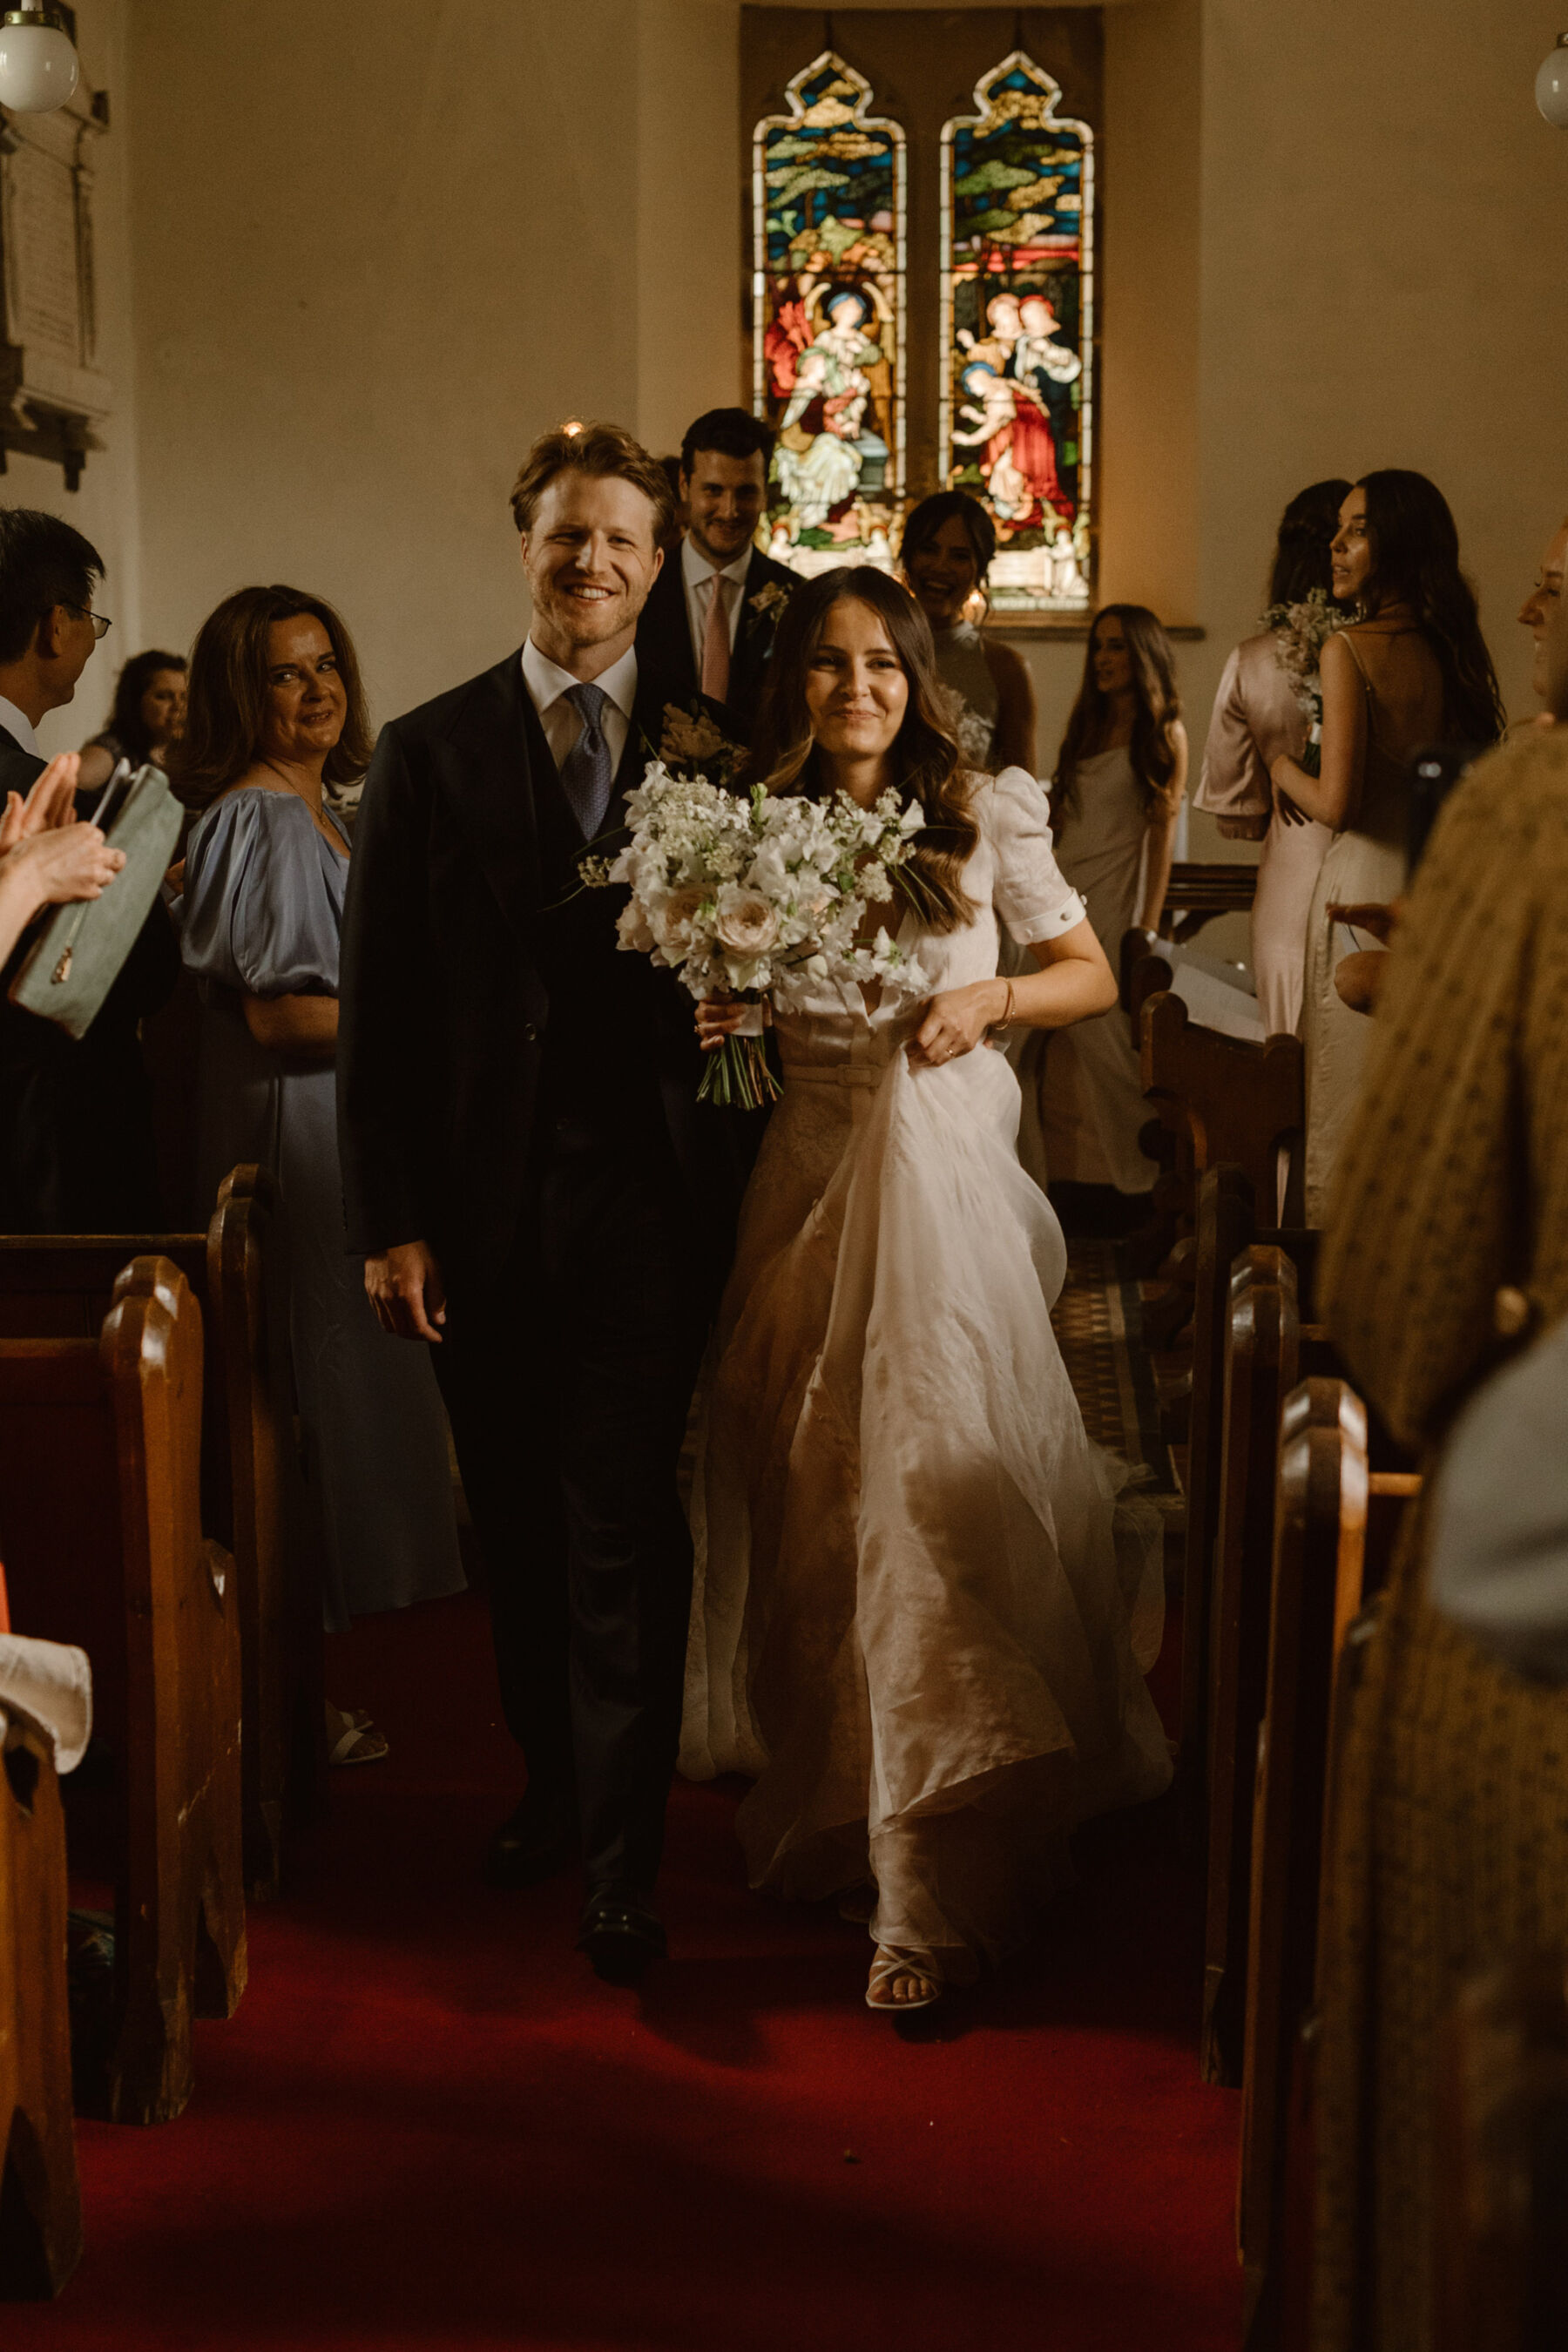 Wedding at Dewsall church, Herefordshire. Agnes Black Photography.